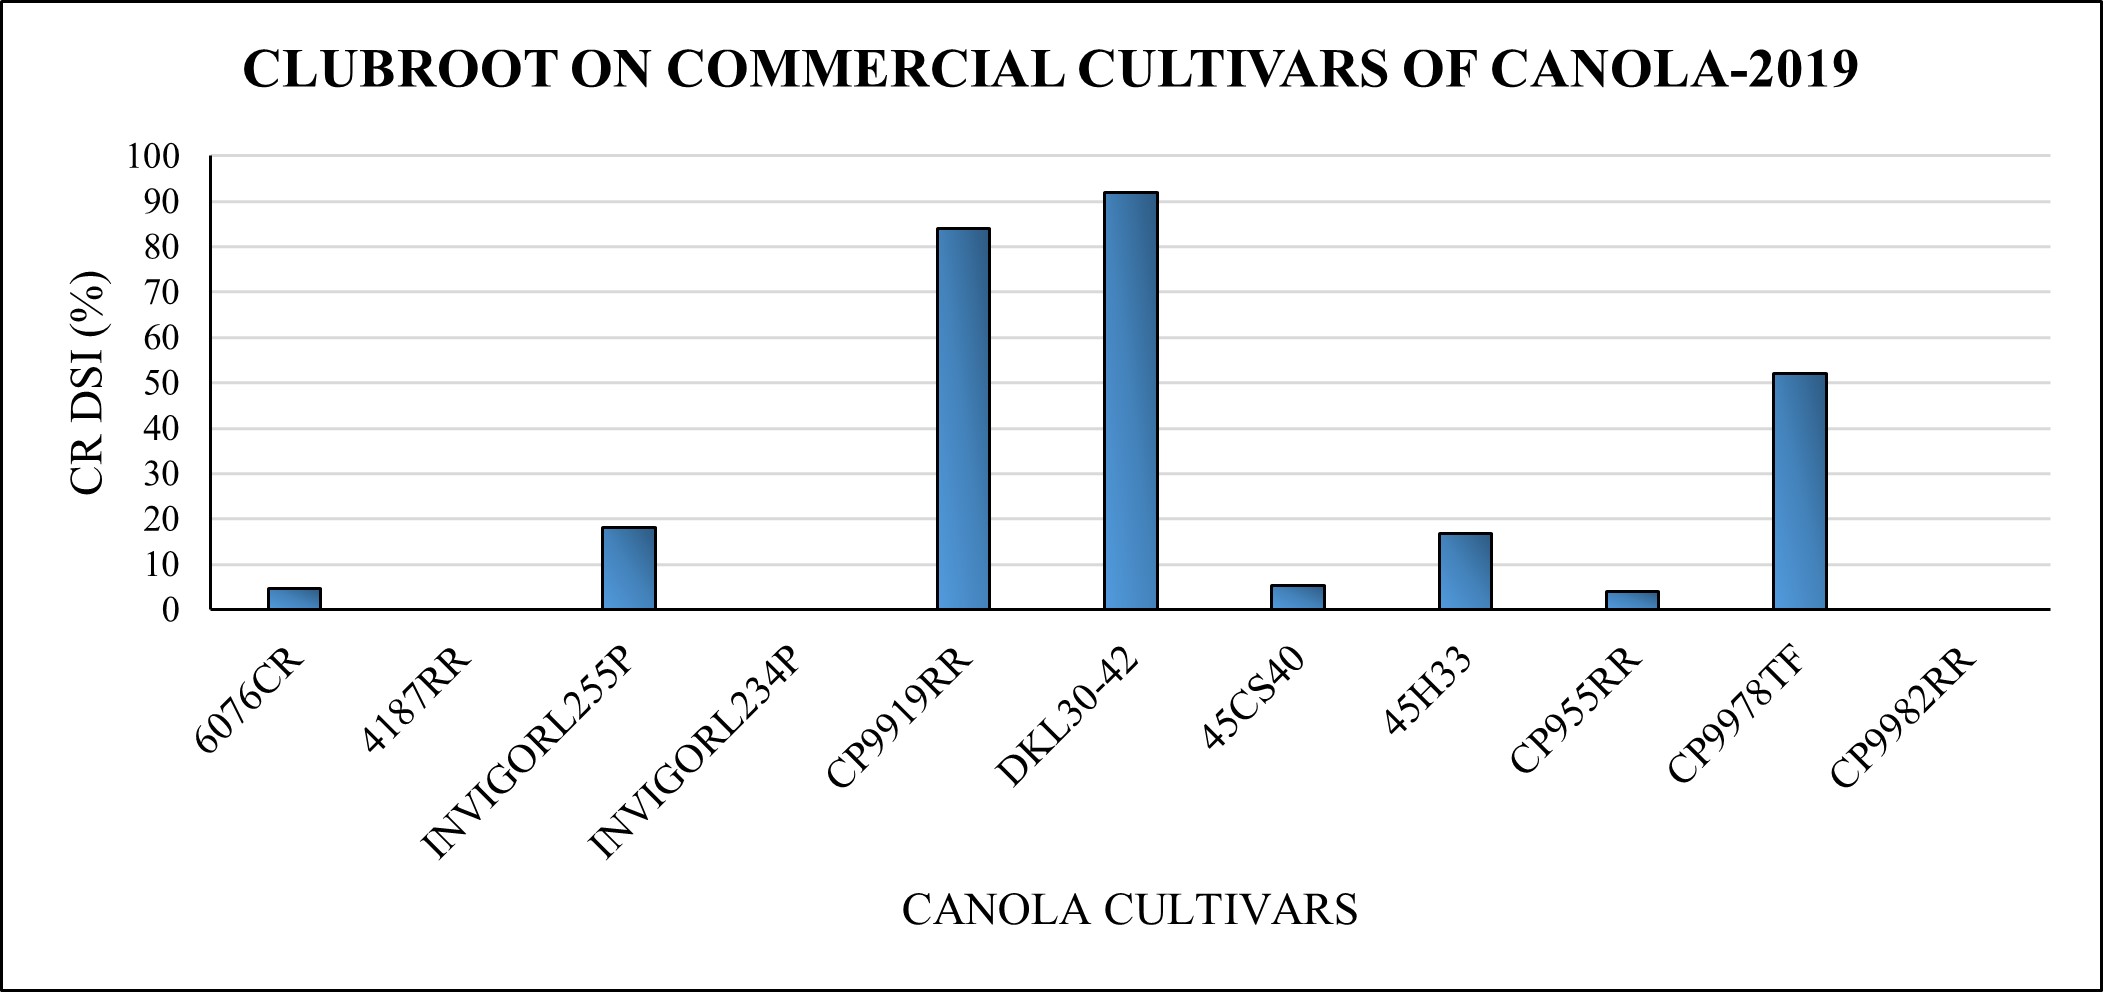 Mean clubroot incidence (%) on various commercial cultivars of canola tested in 2019.